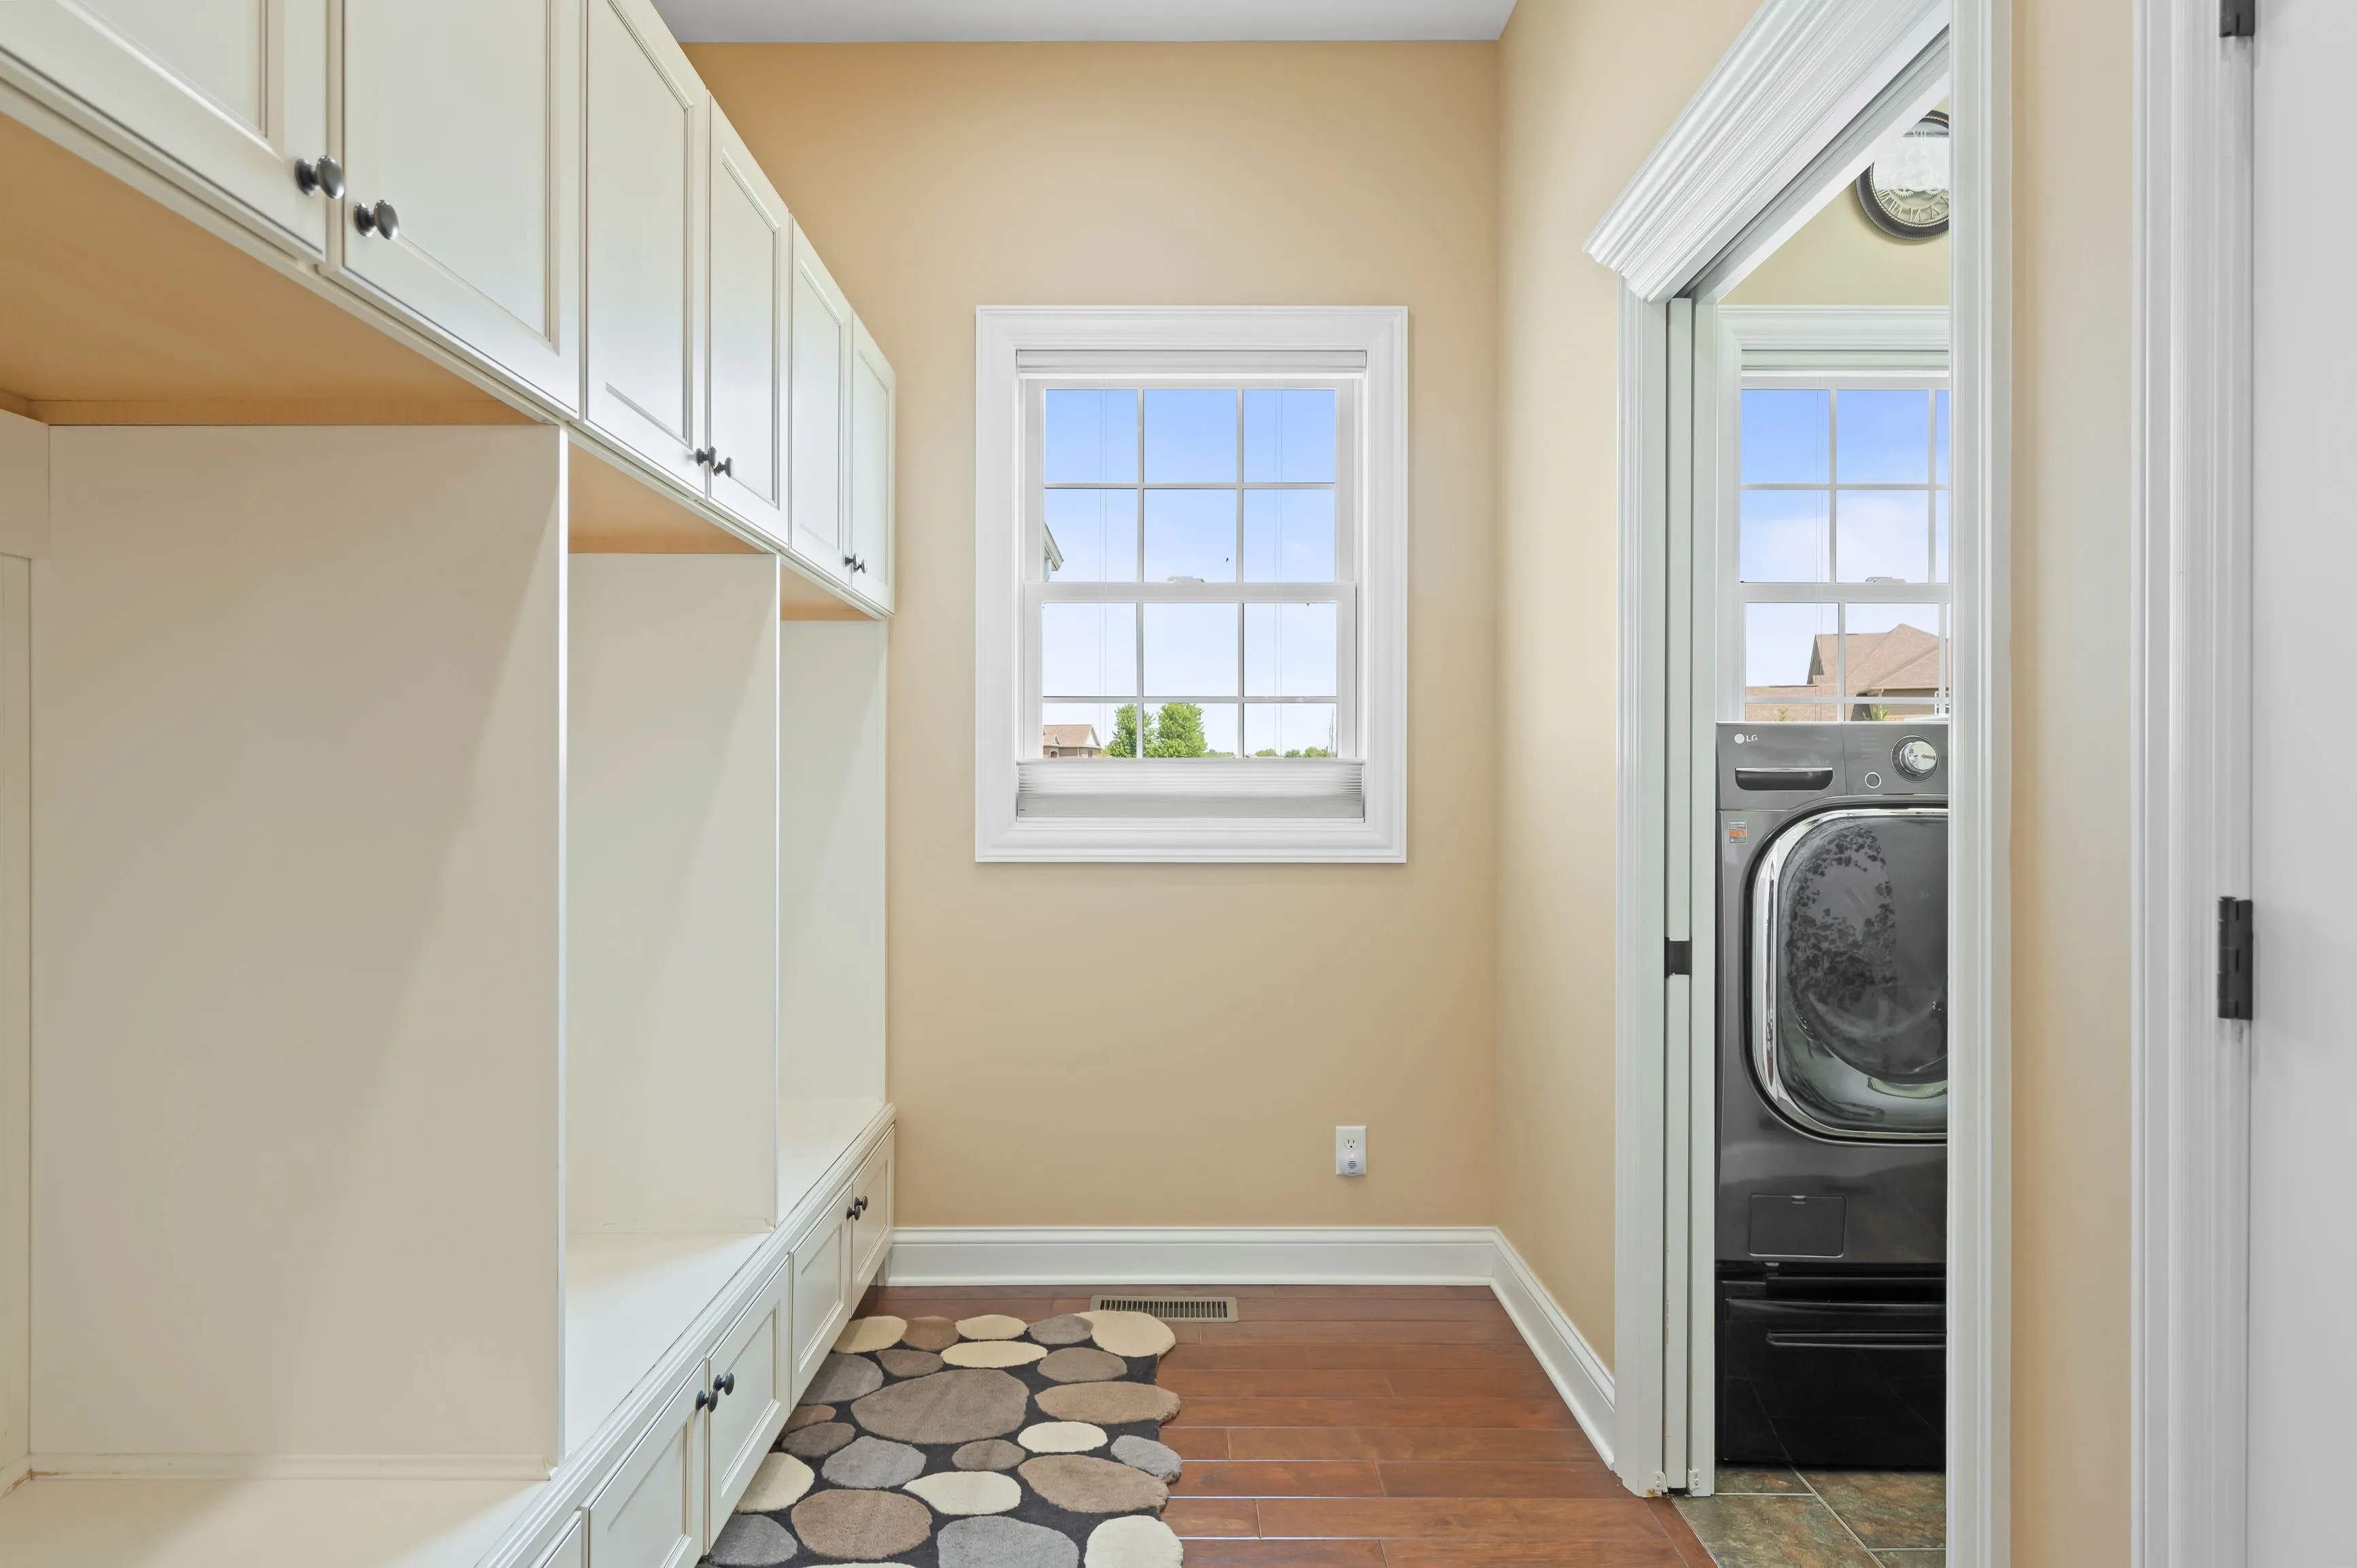 Bright and airy laundry room with built-in cabinets, a window, and modern appliances.